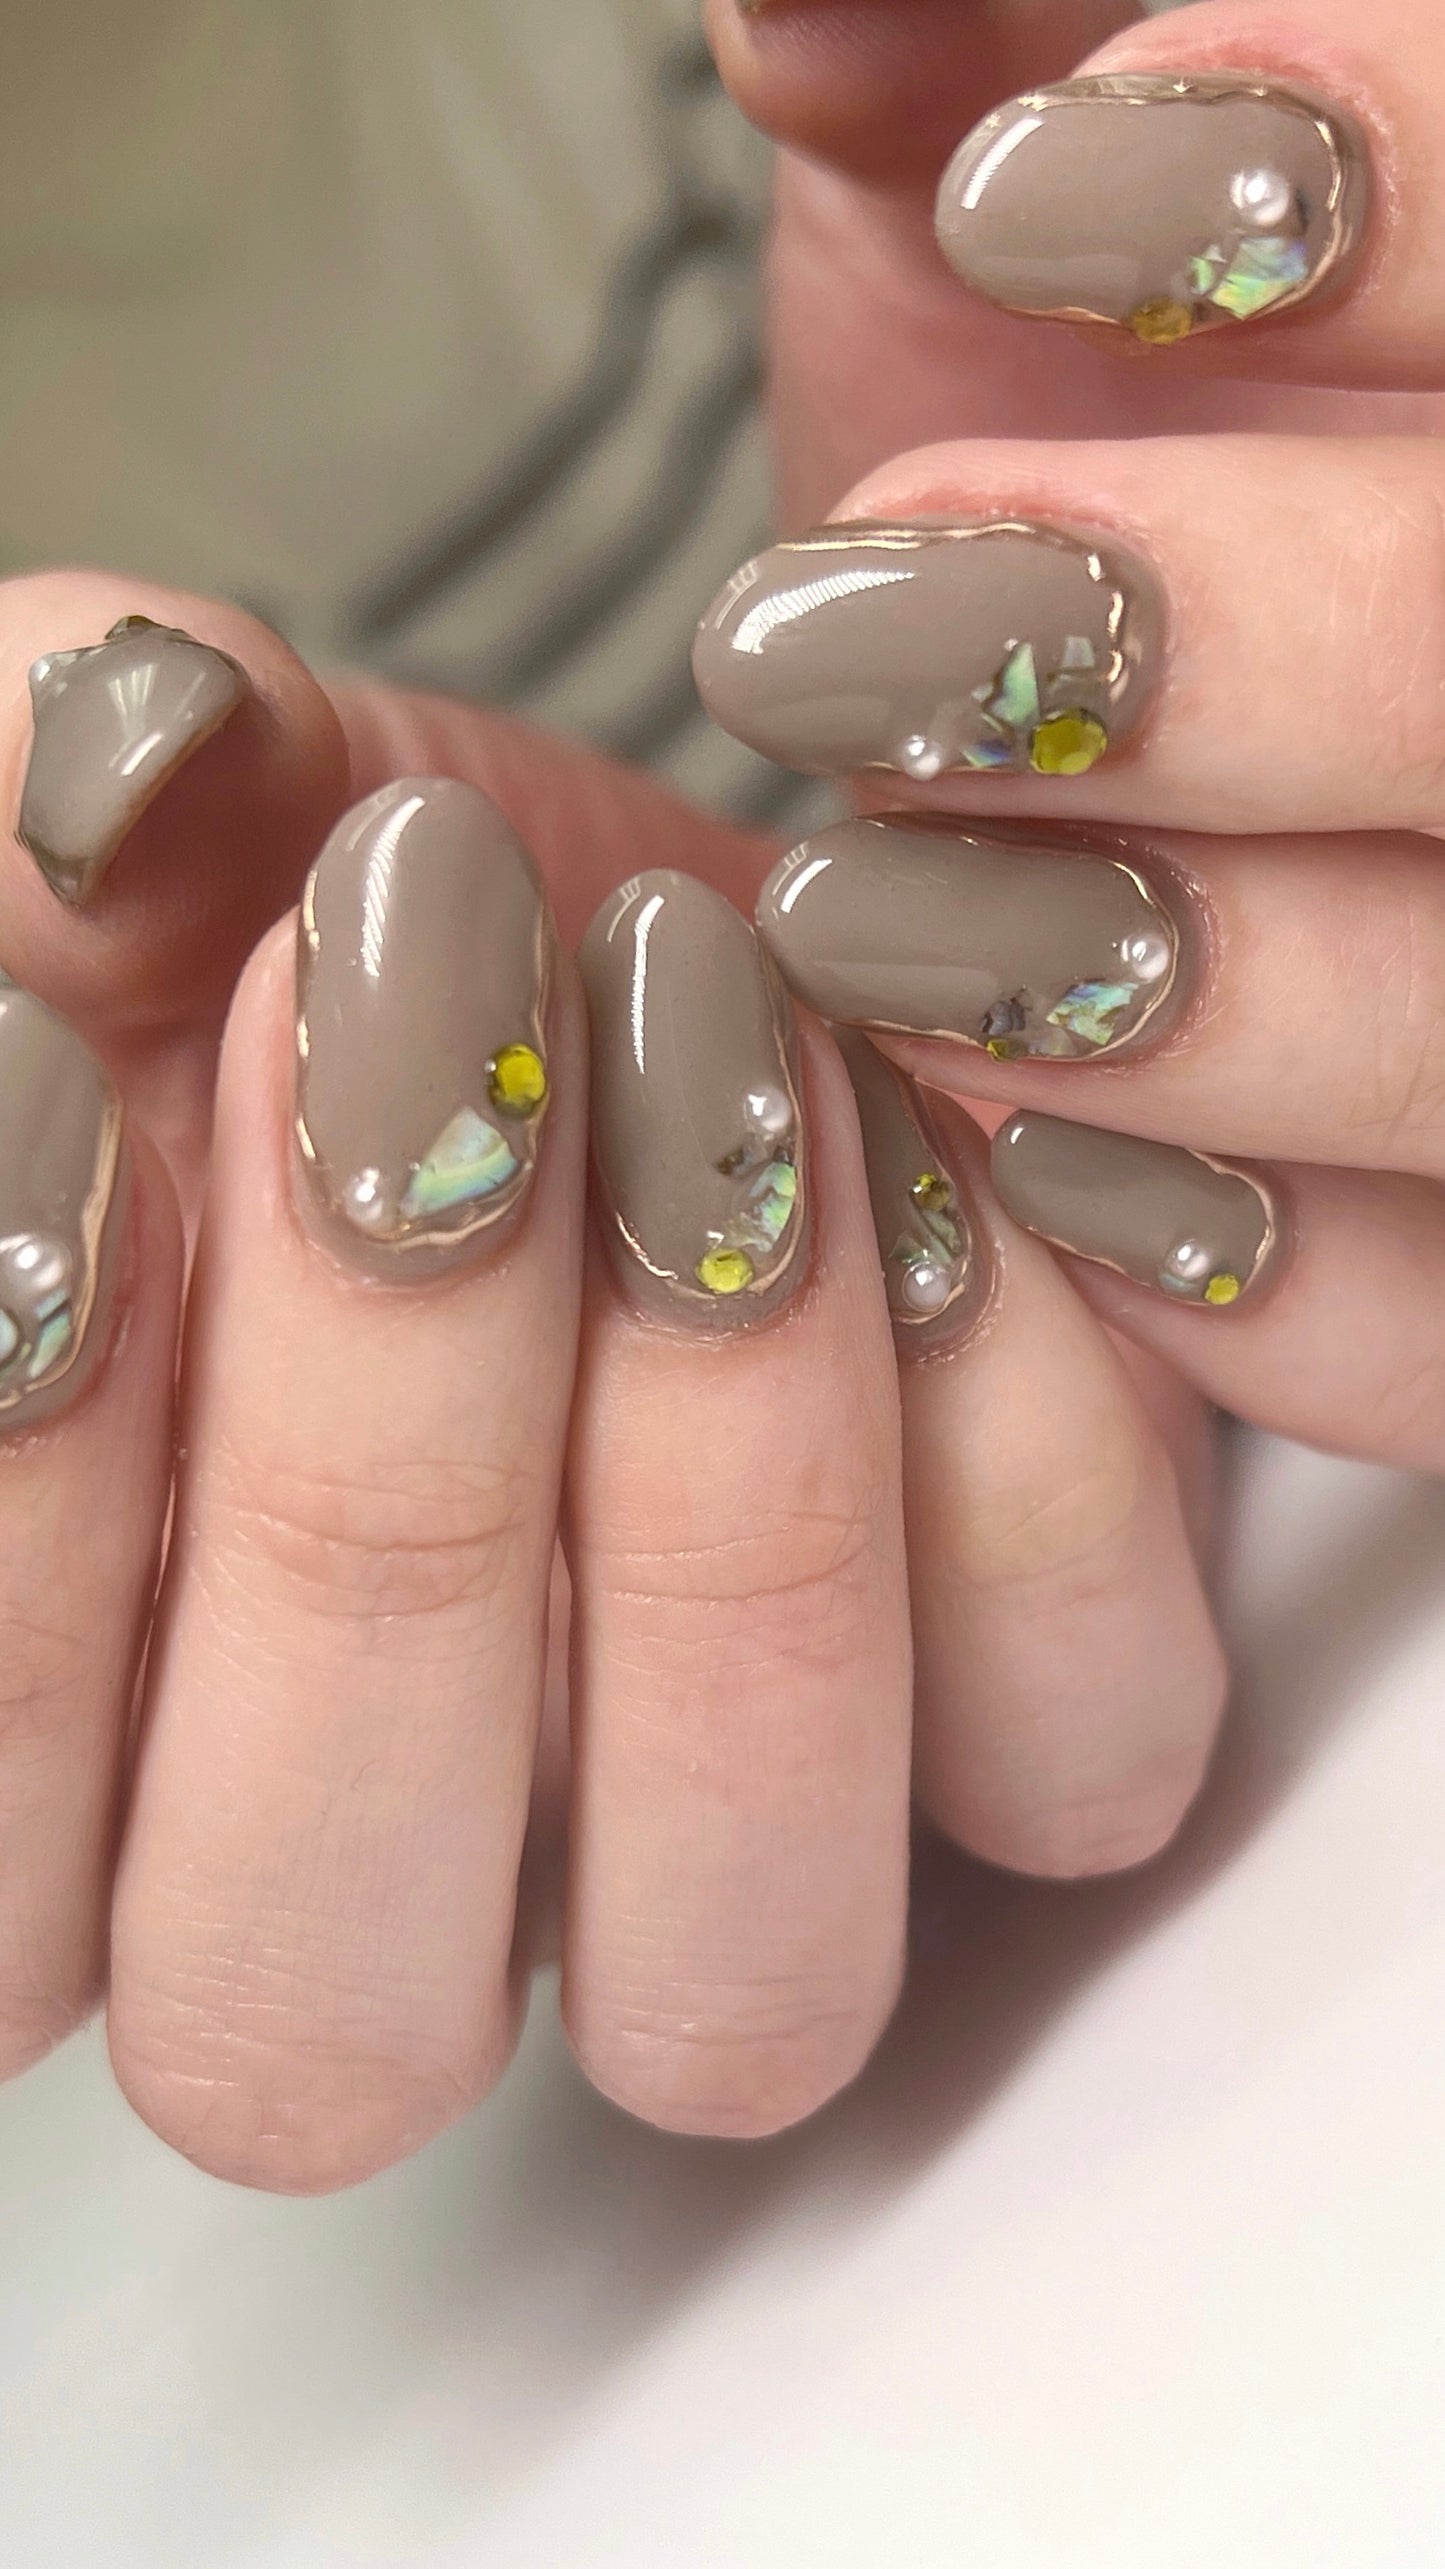 Nail art example on hands. 